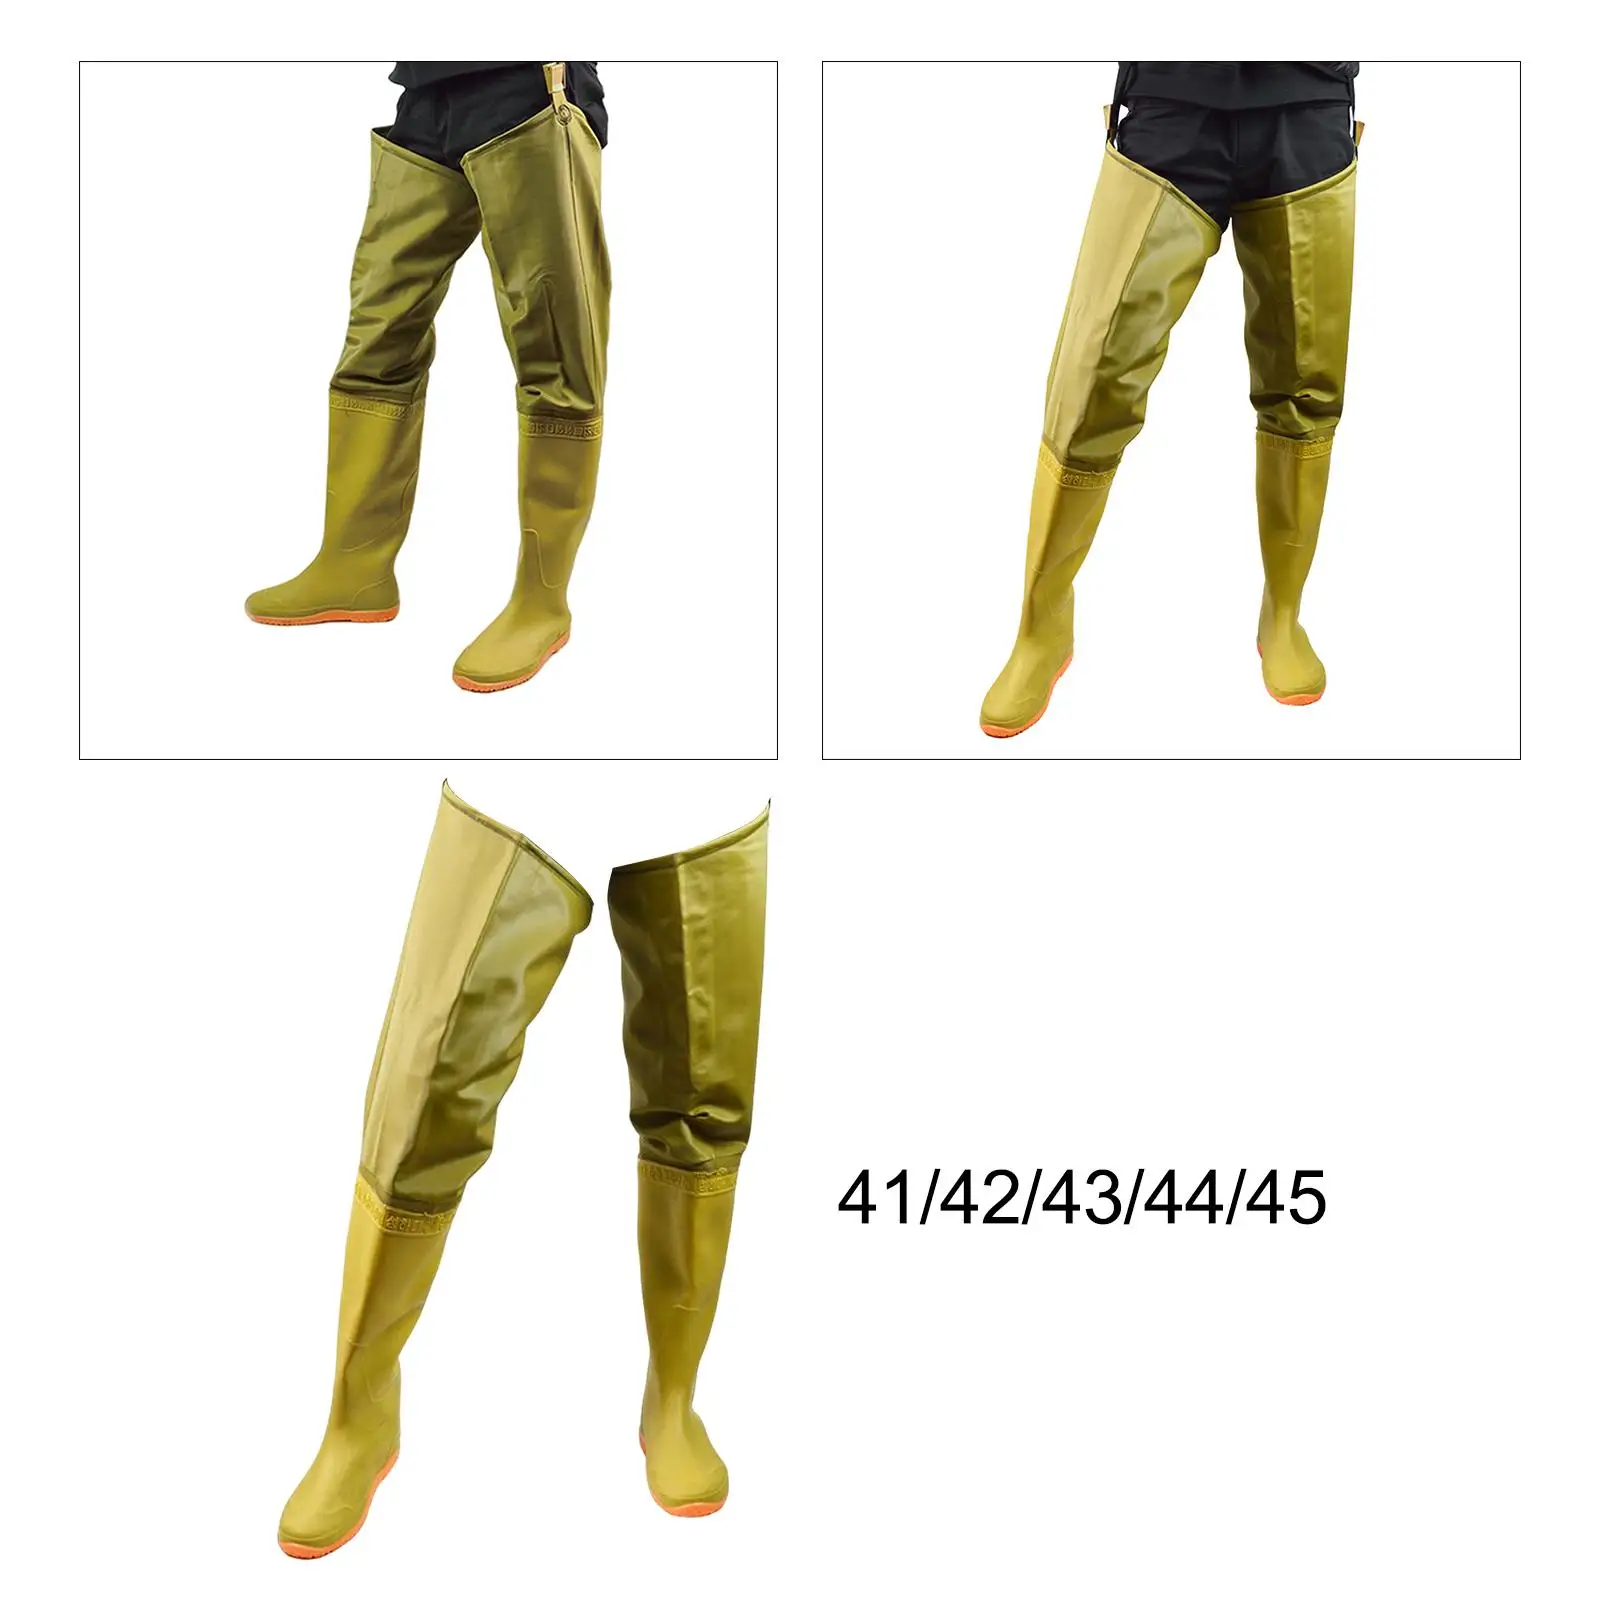 Fishing Hip Waders Watertight Hip Boots with Buckle Boots Bootfoot Water Pants Rain Boot Nylon Fishing Waders for Muck Work